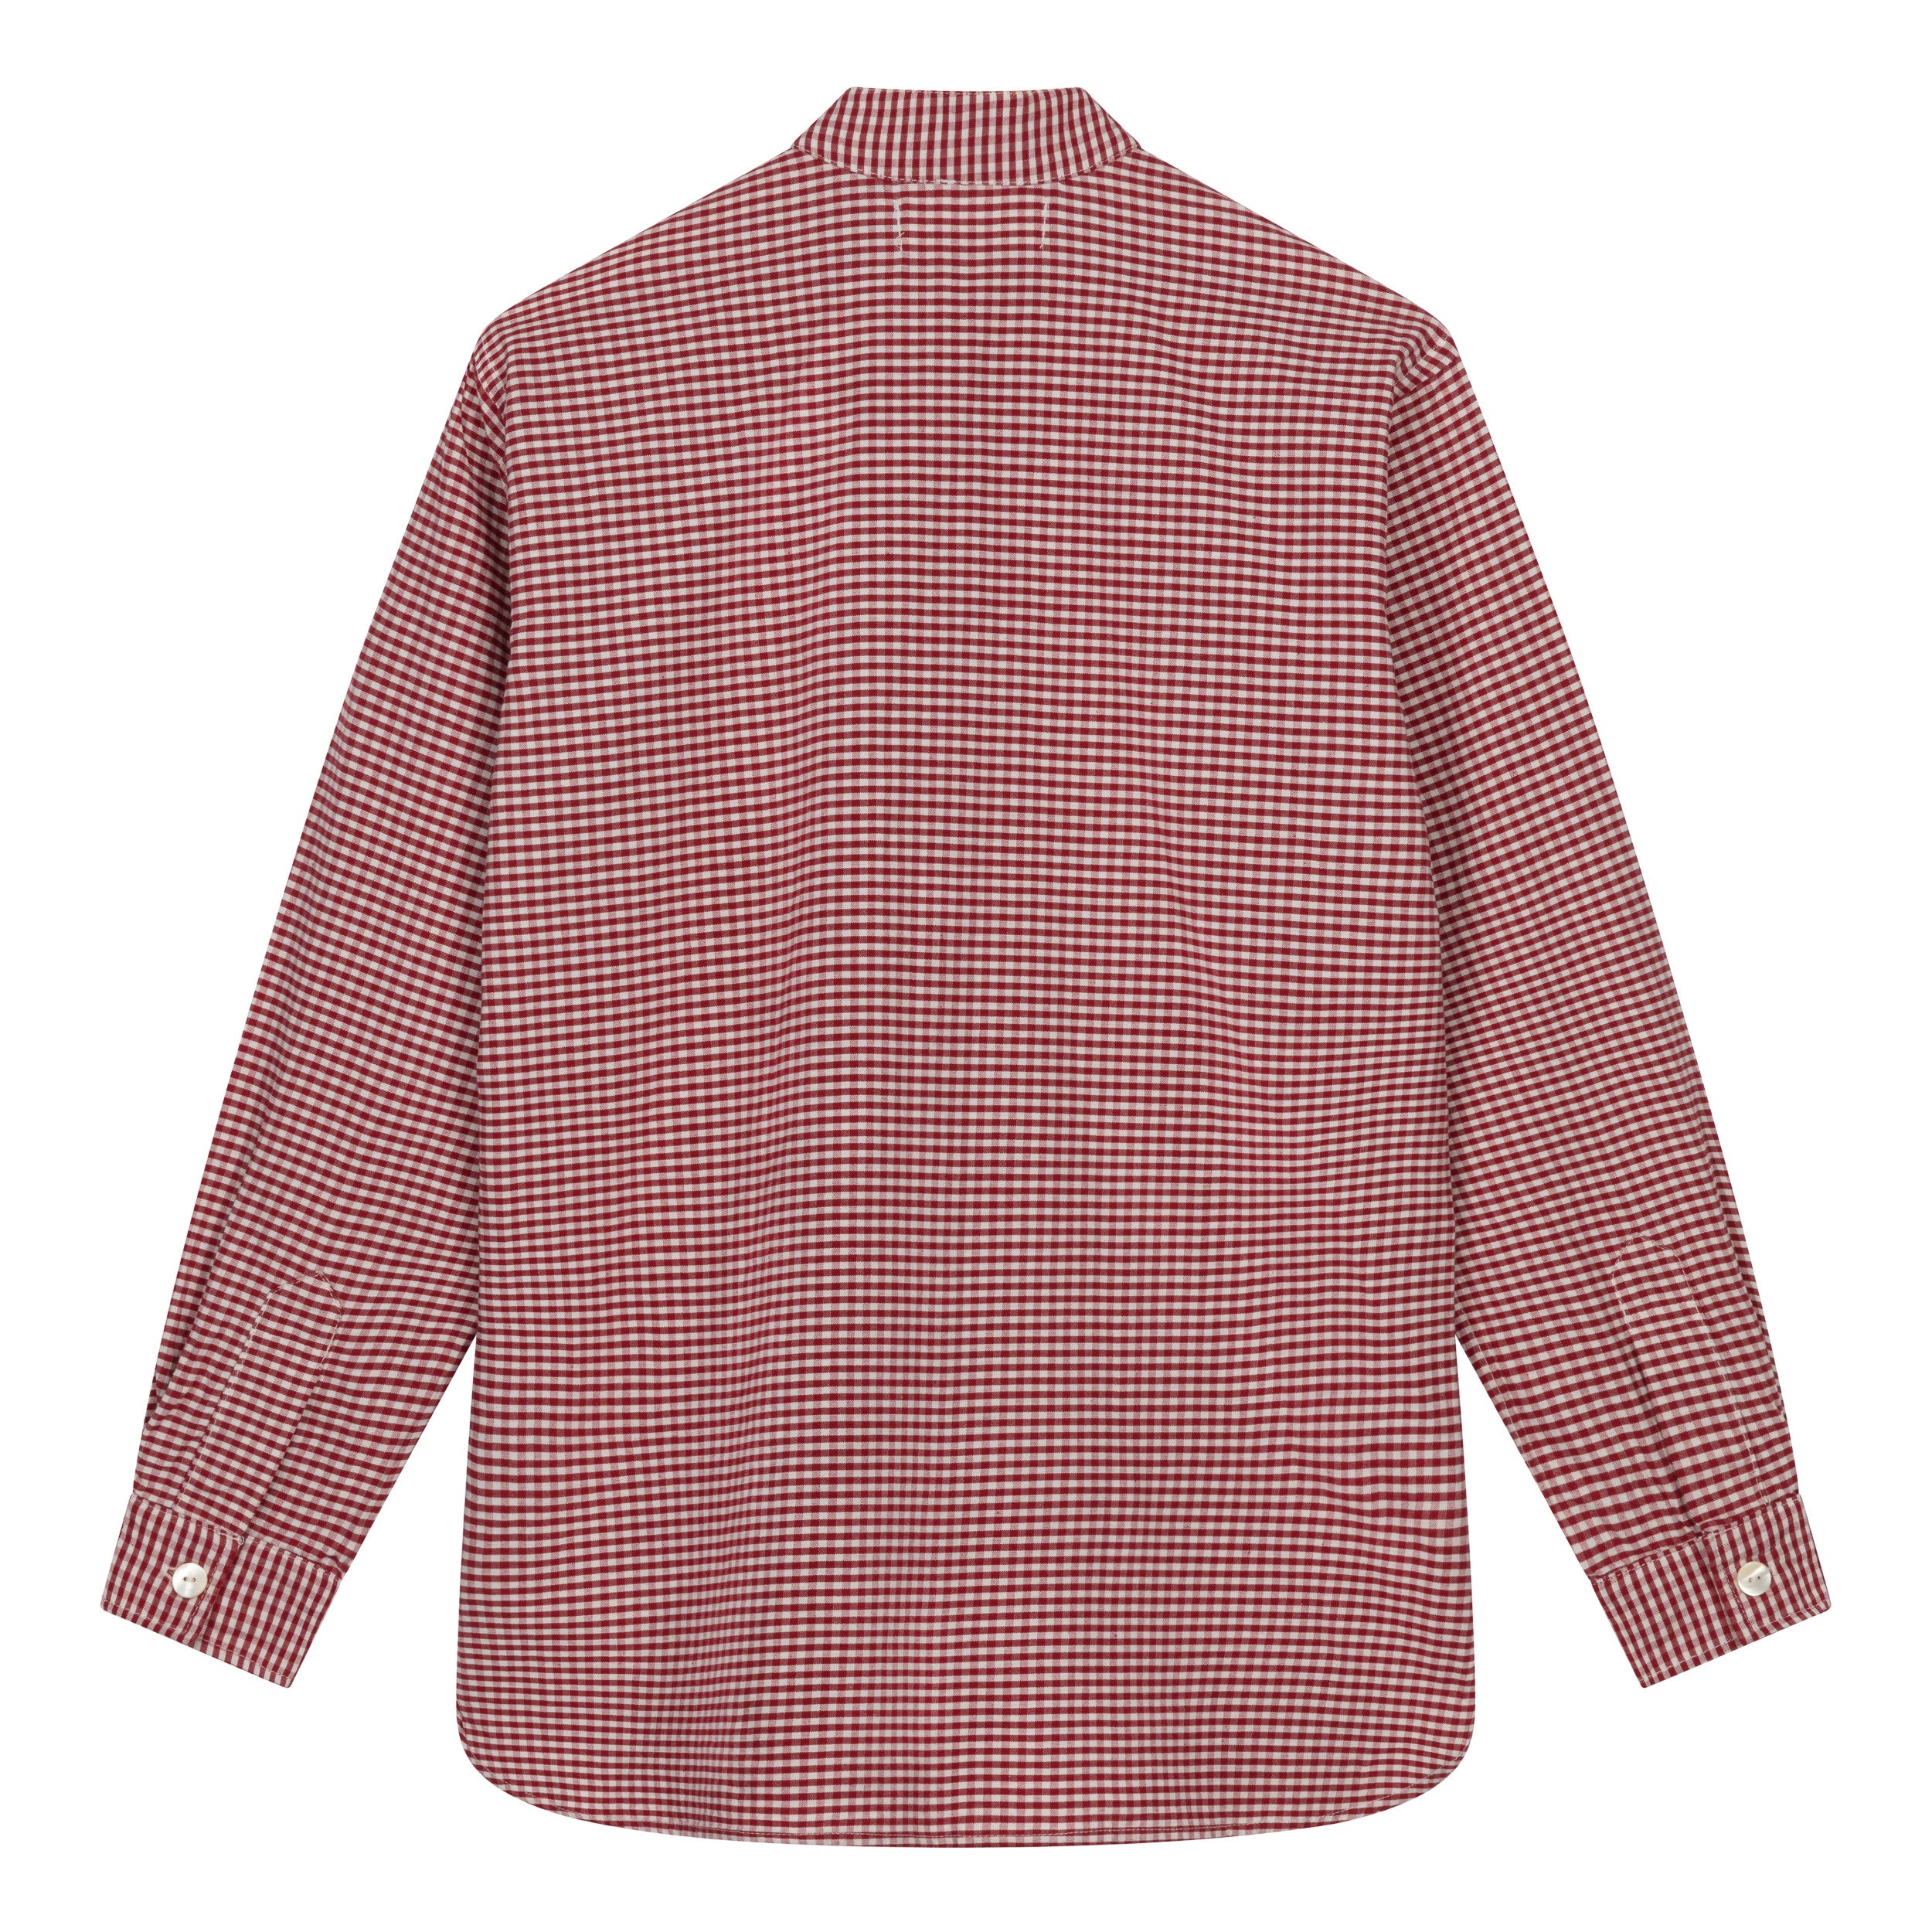 Carrier Company Collarless Work Shirt in Gingham Red Cotton